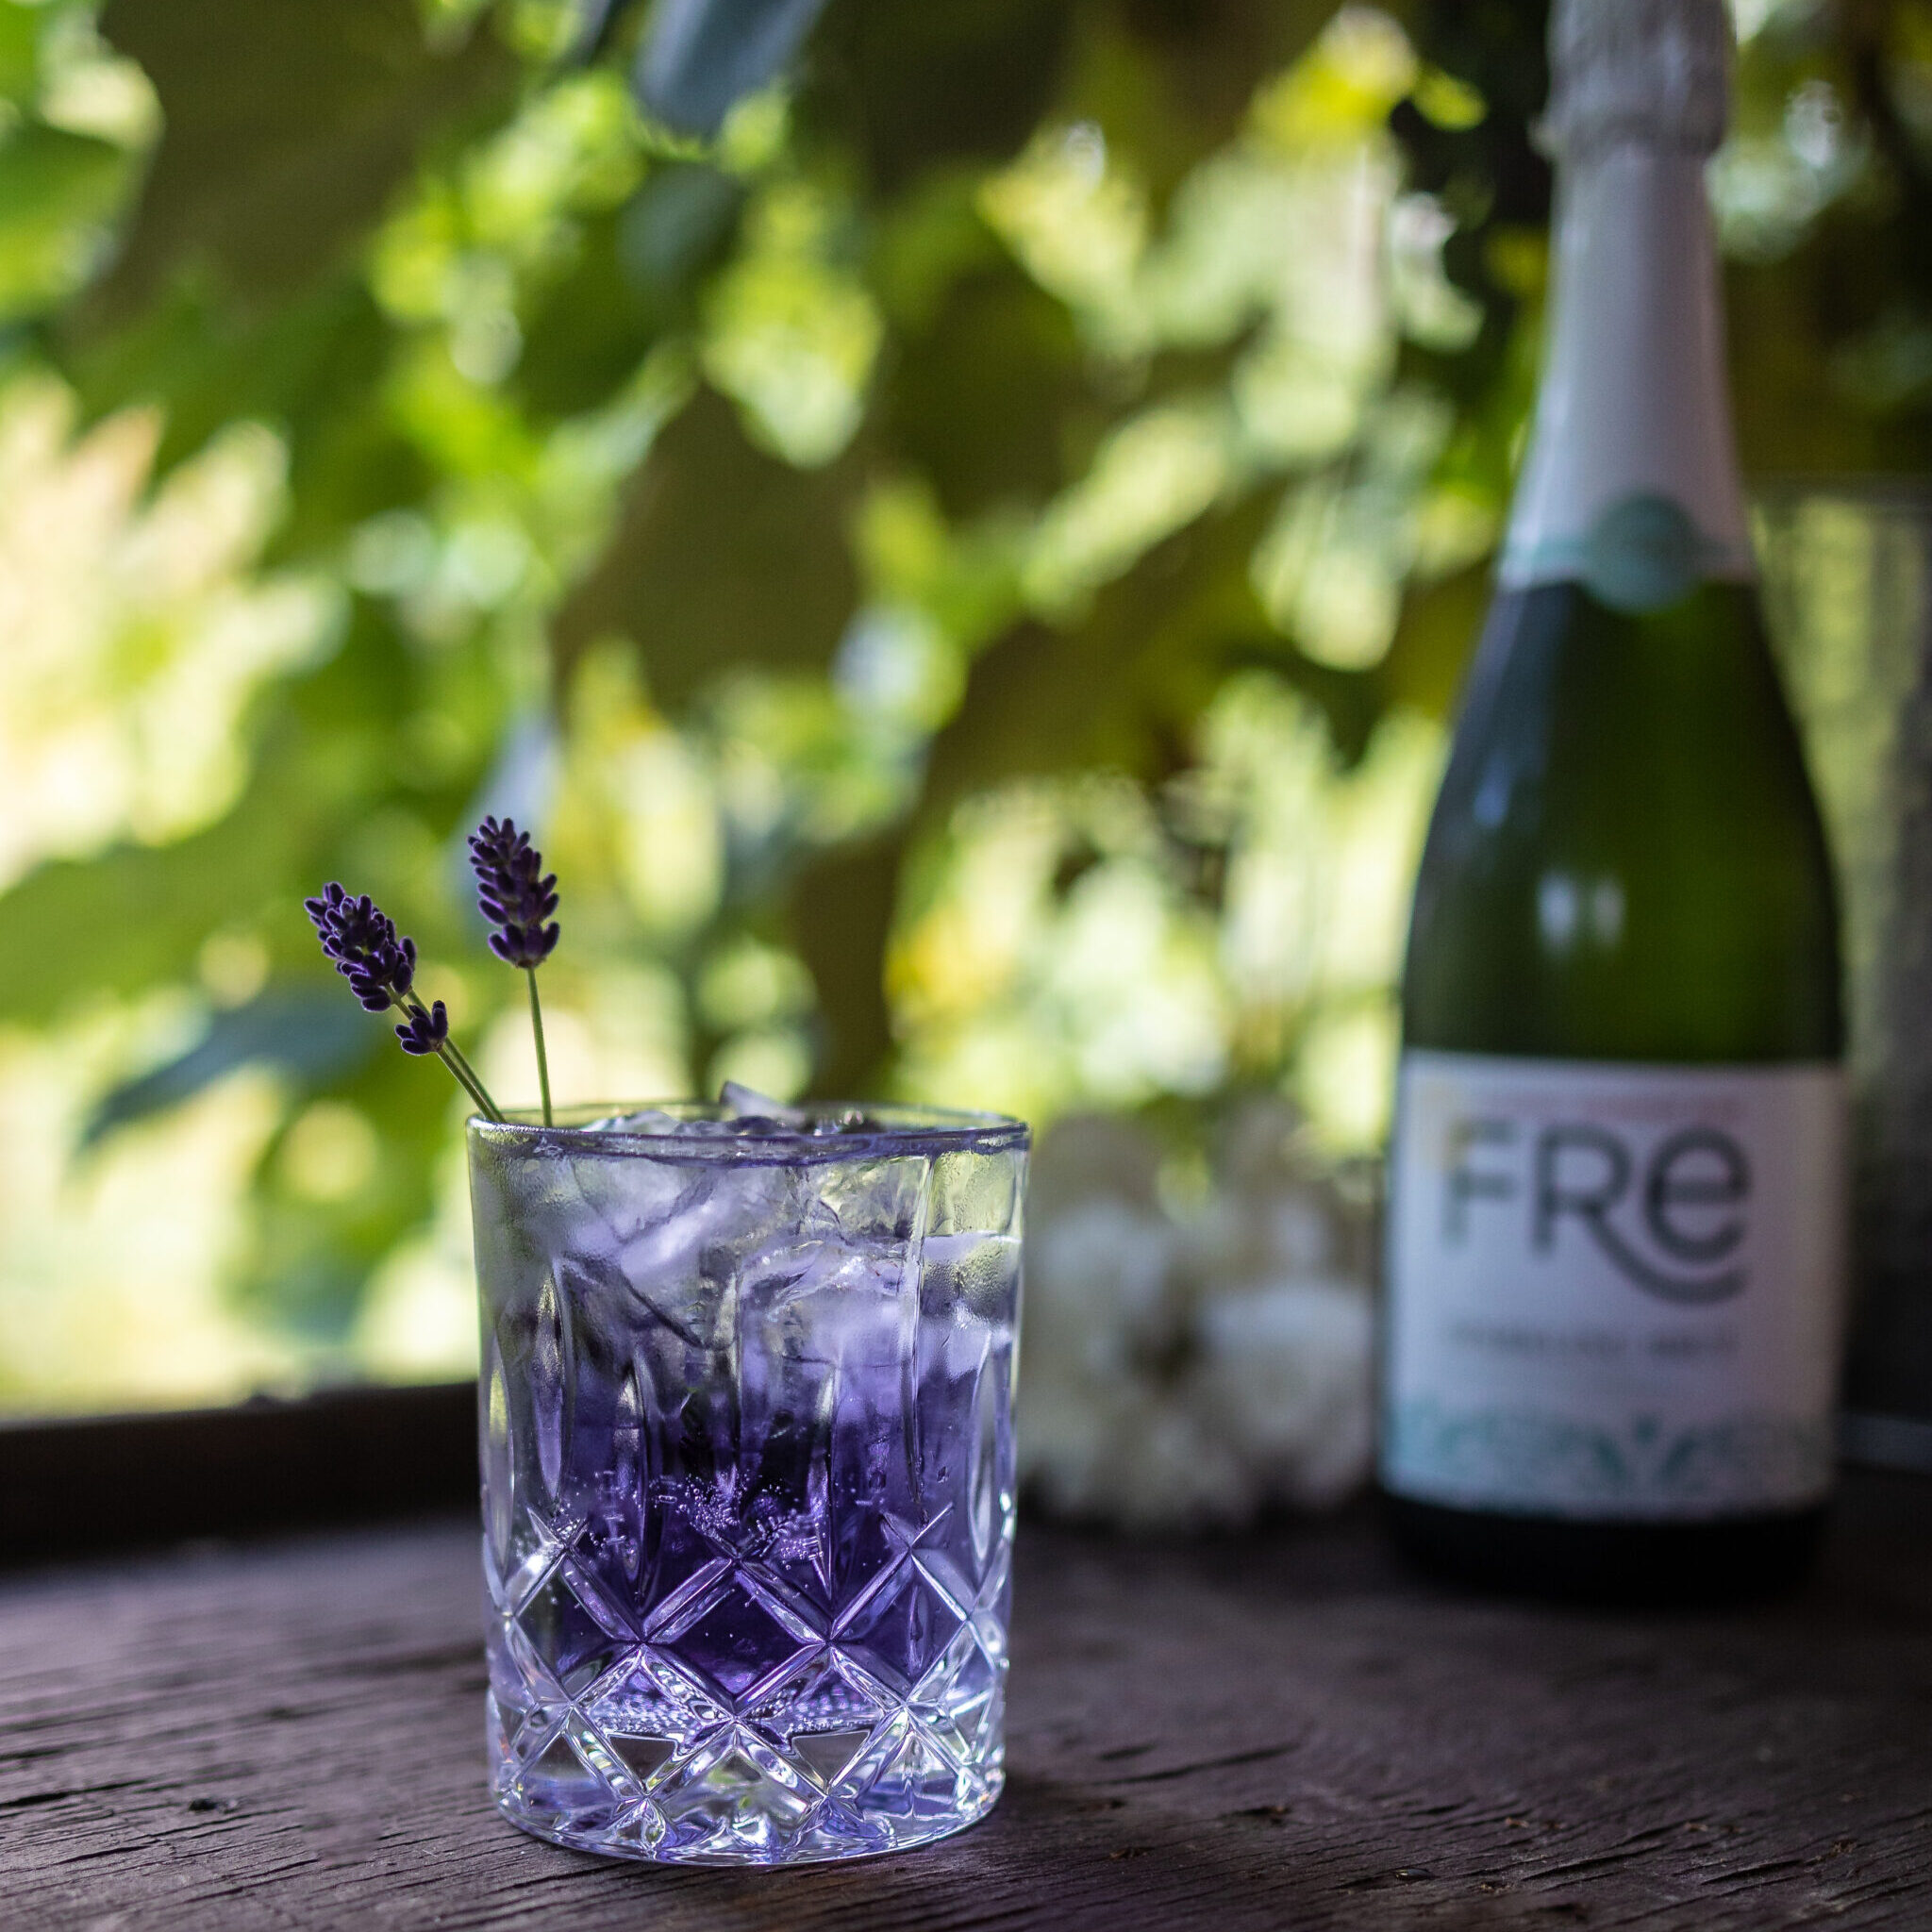 FRE Lavender & Butterfly Pea Flower Spritz, fre wines, fre, free, alcohol removed, alcohol removed white wine, alcohol free white wine, mocktails, wine cocktails, spritz, alcohol free drink